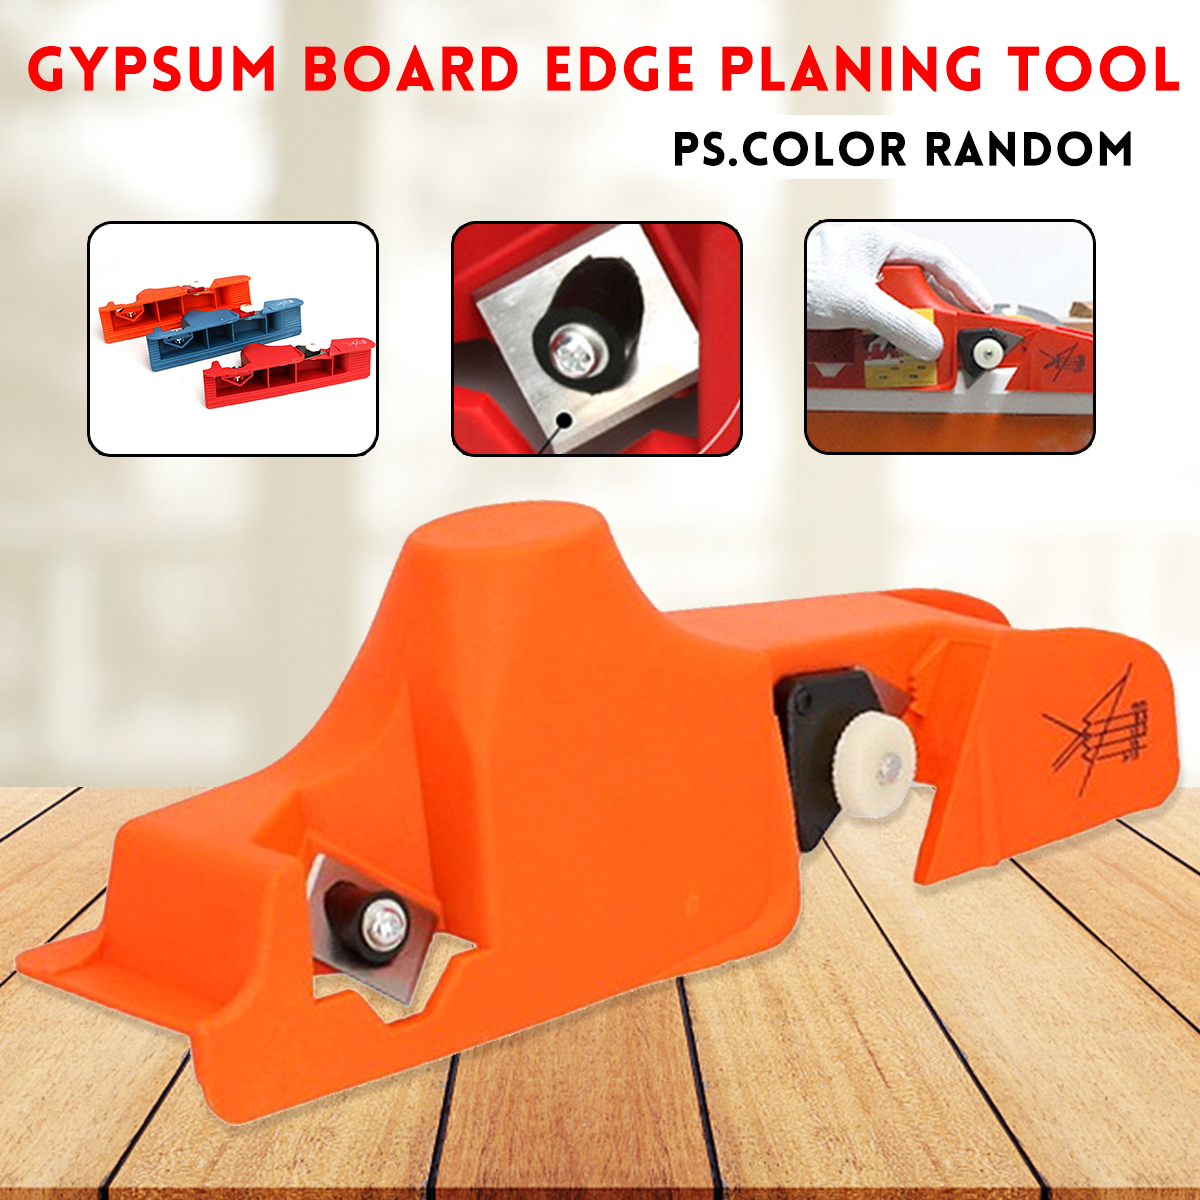 Edge-Planing-Machine-For-Gypsum-Board-Cement-Plate-Trimming-Tools-Kit-Plasterboard-1593955-1